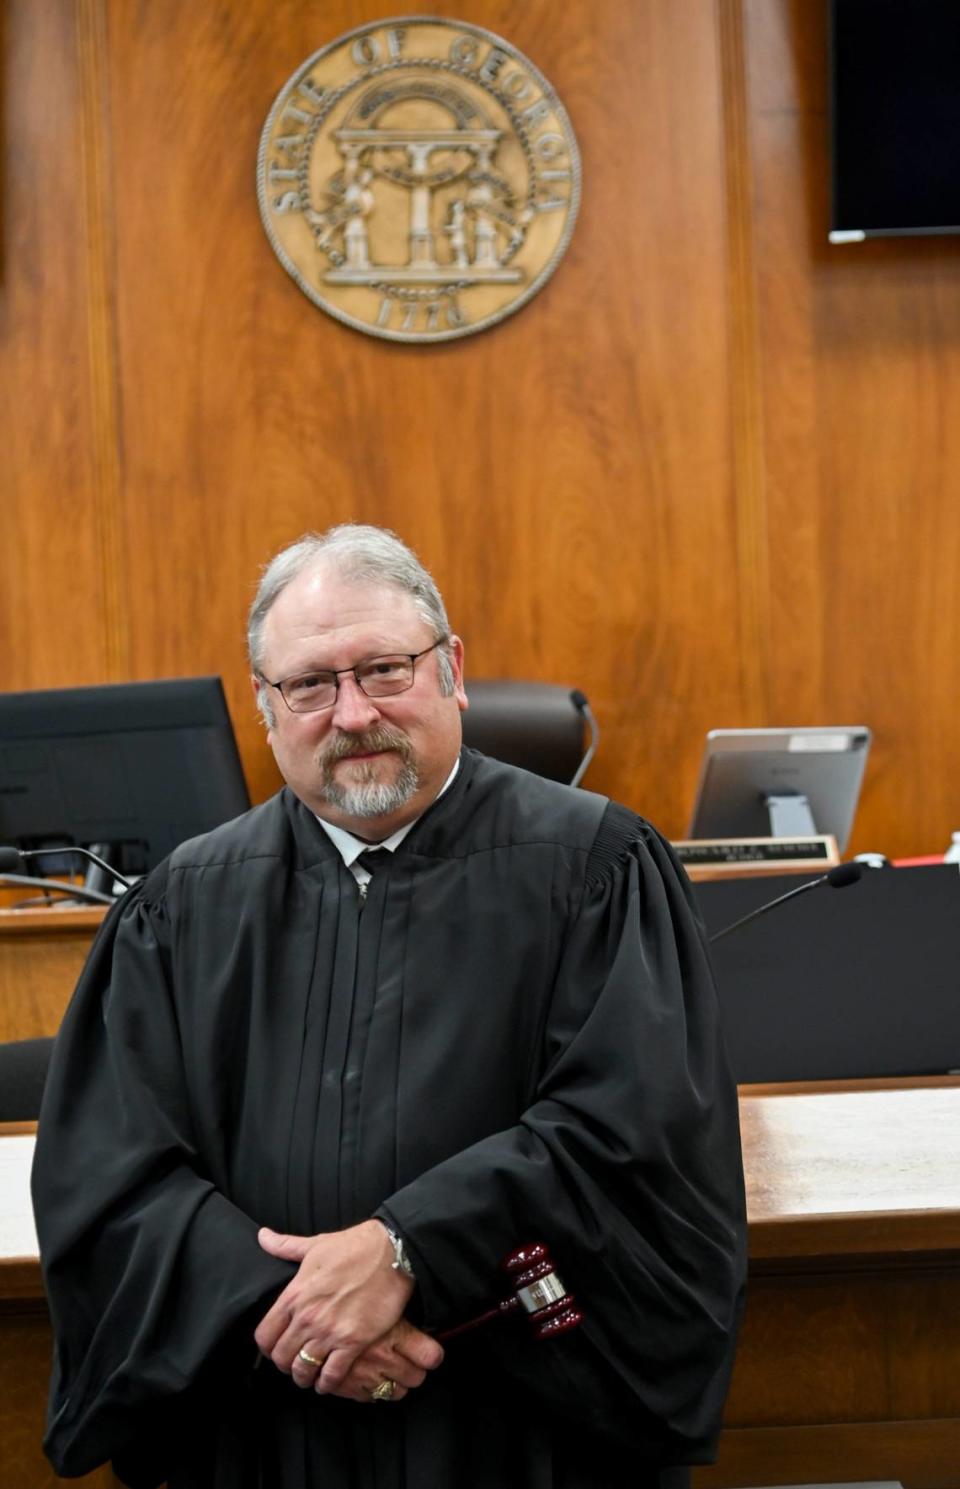 Bibb County Superior Court Judge Howard Simms is retiring after working at the Bibb County courthouse for nearly forty years in different capcities.